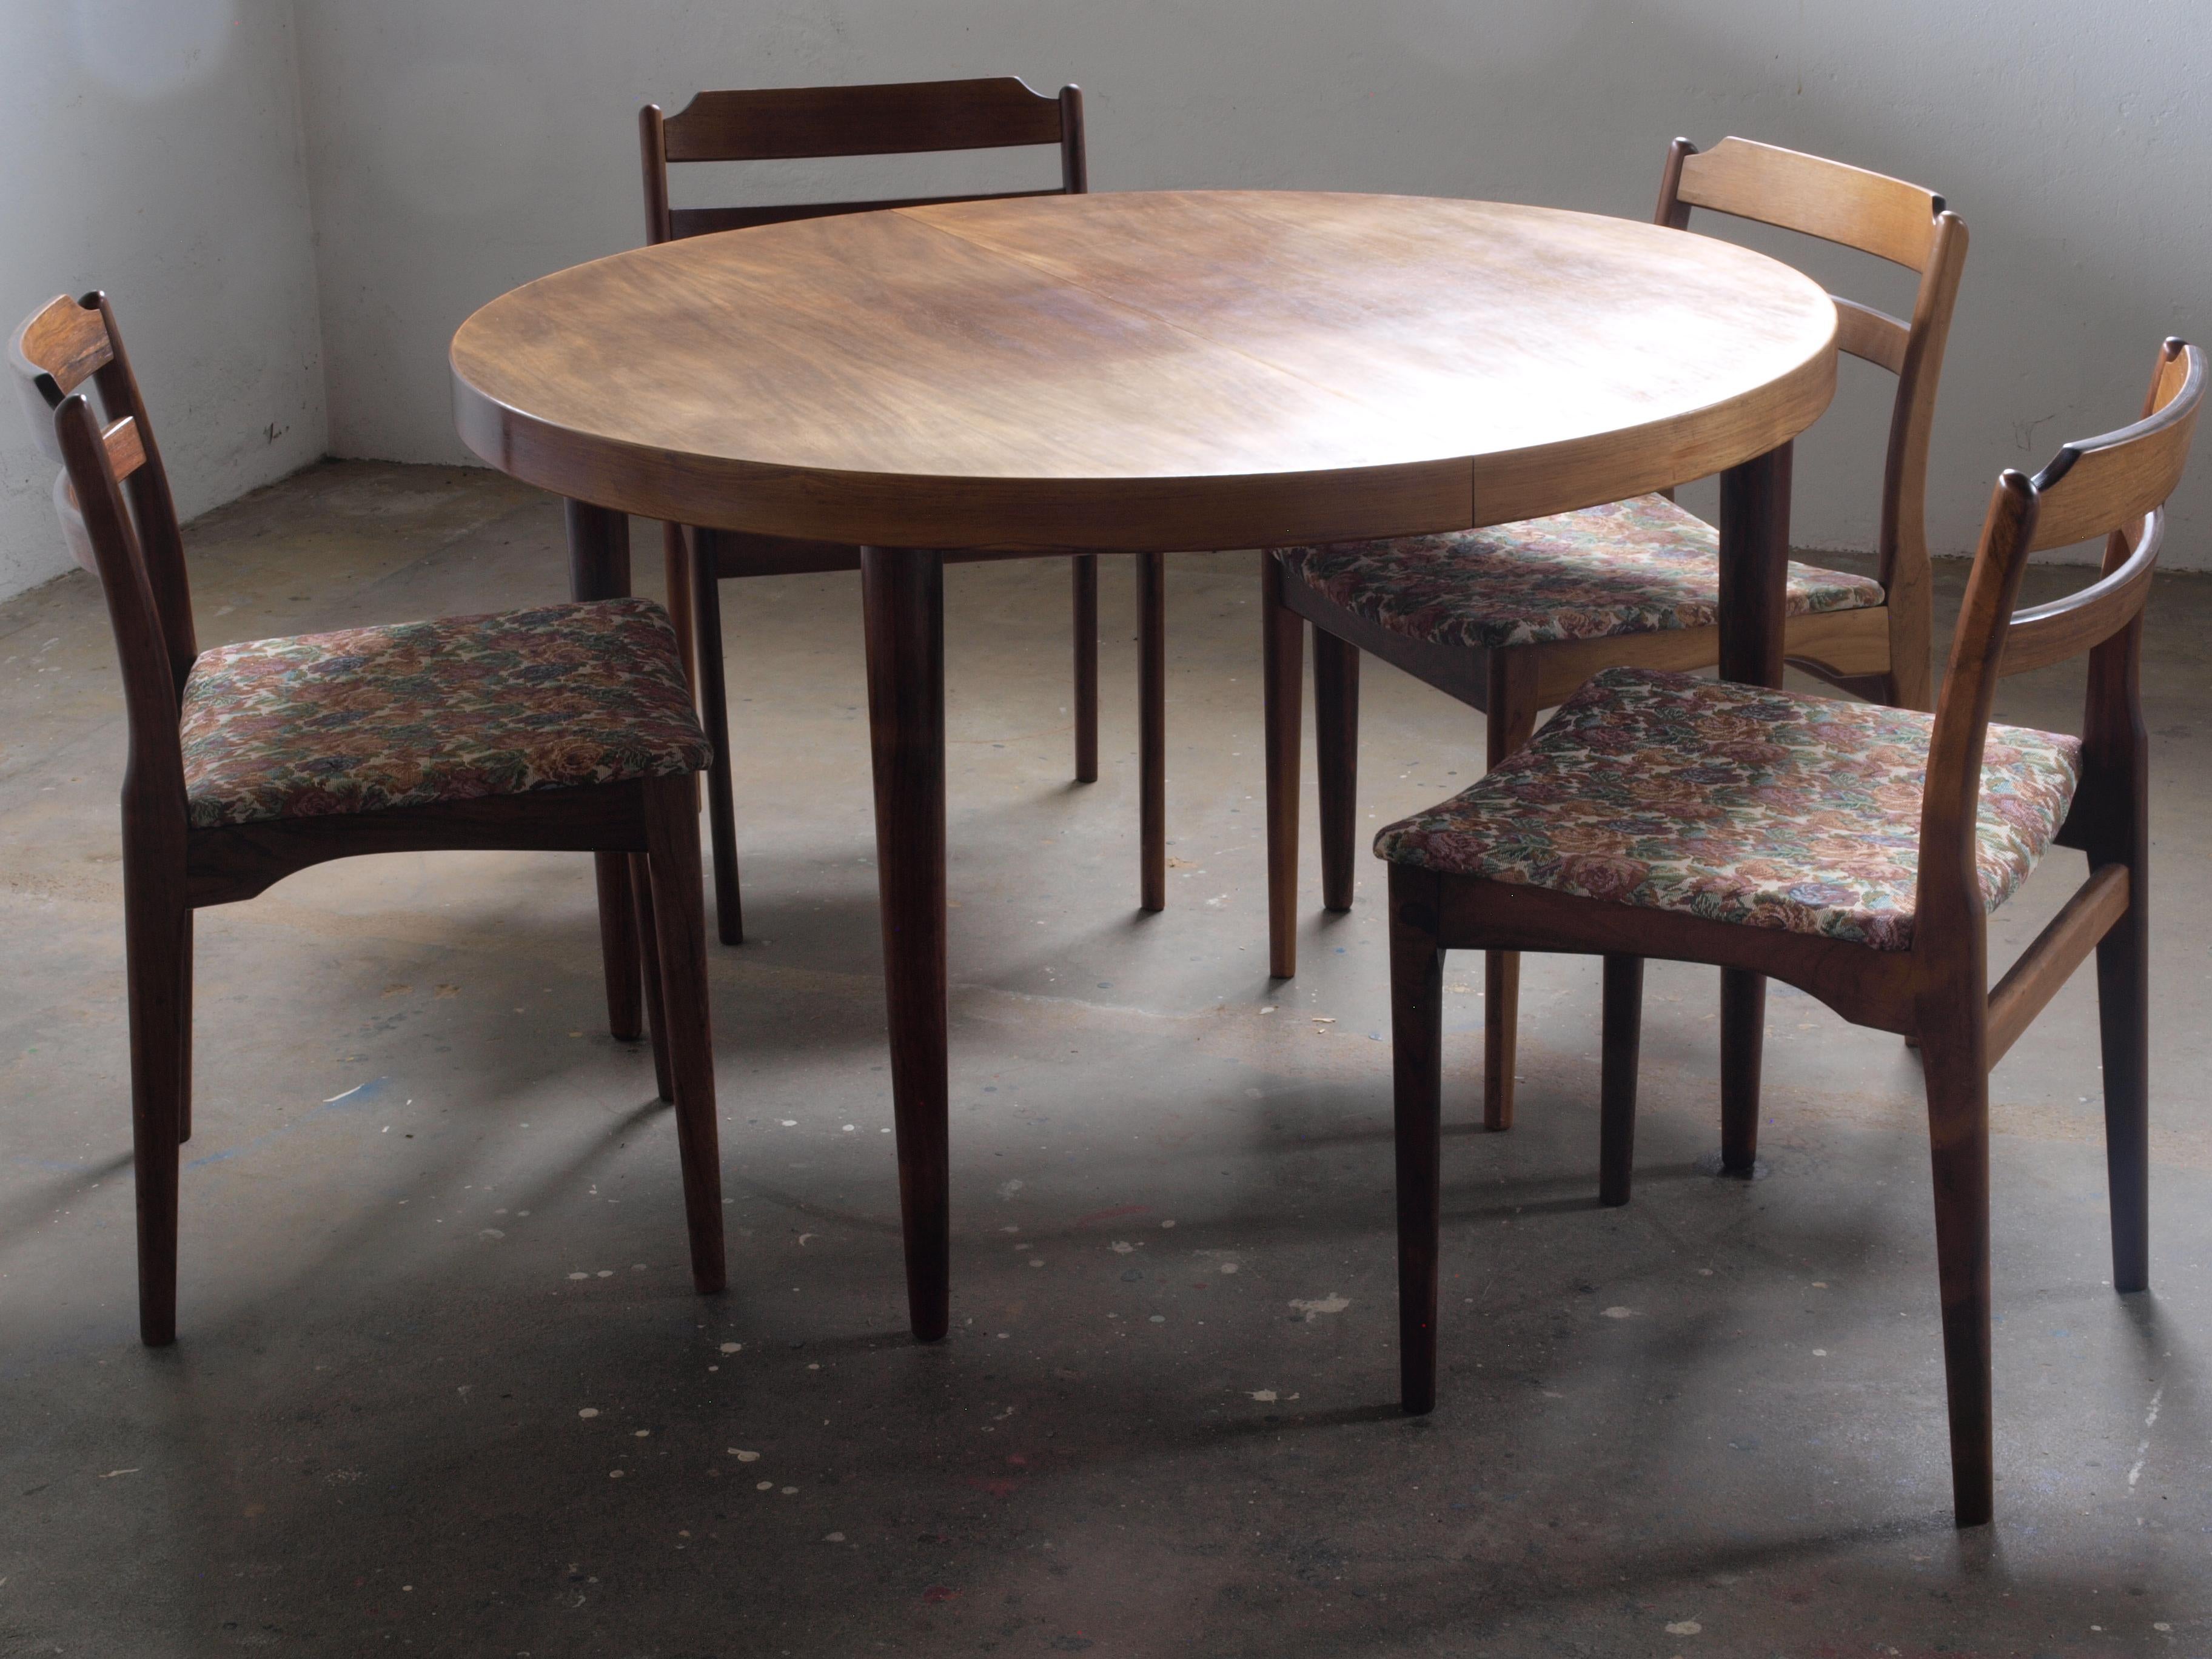 Rosewood Dining Chairs Denmark Thorsø Stole og Møbelfabrik In Good Condition For Sale In Store Heddinge, DK